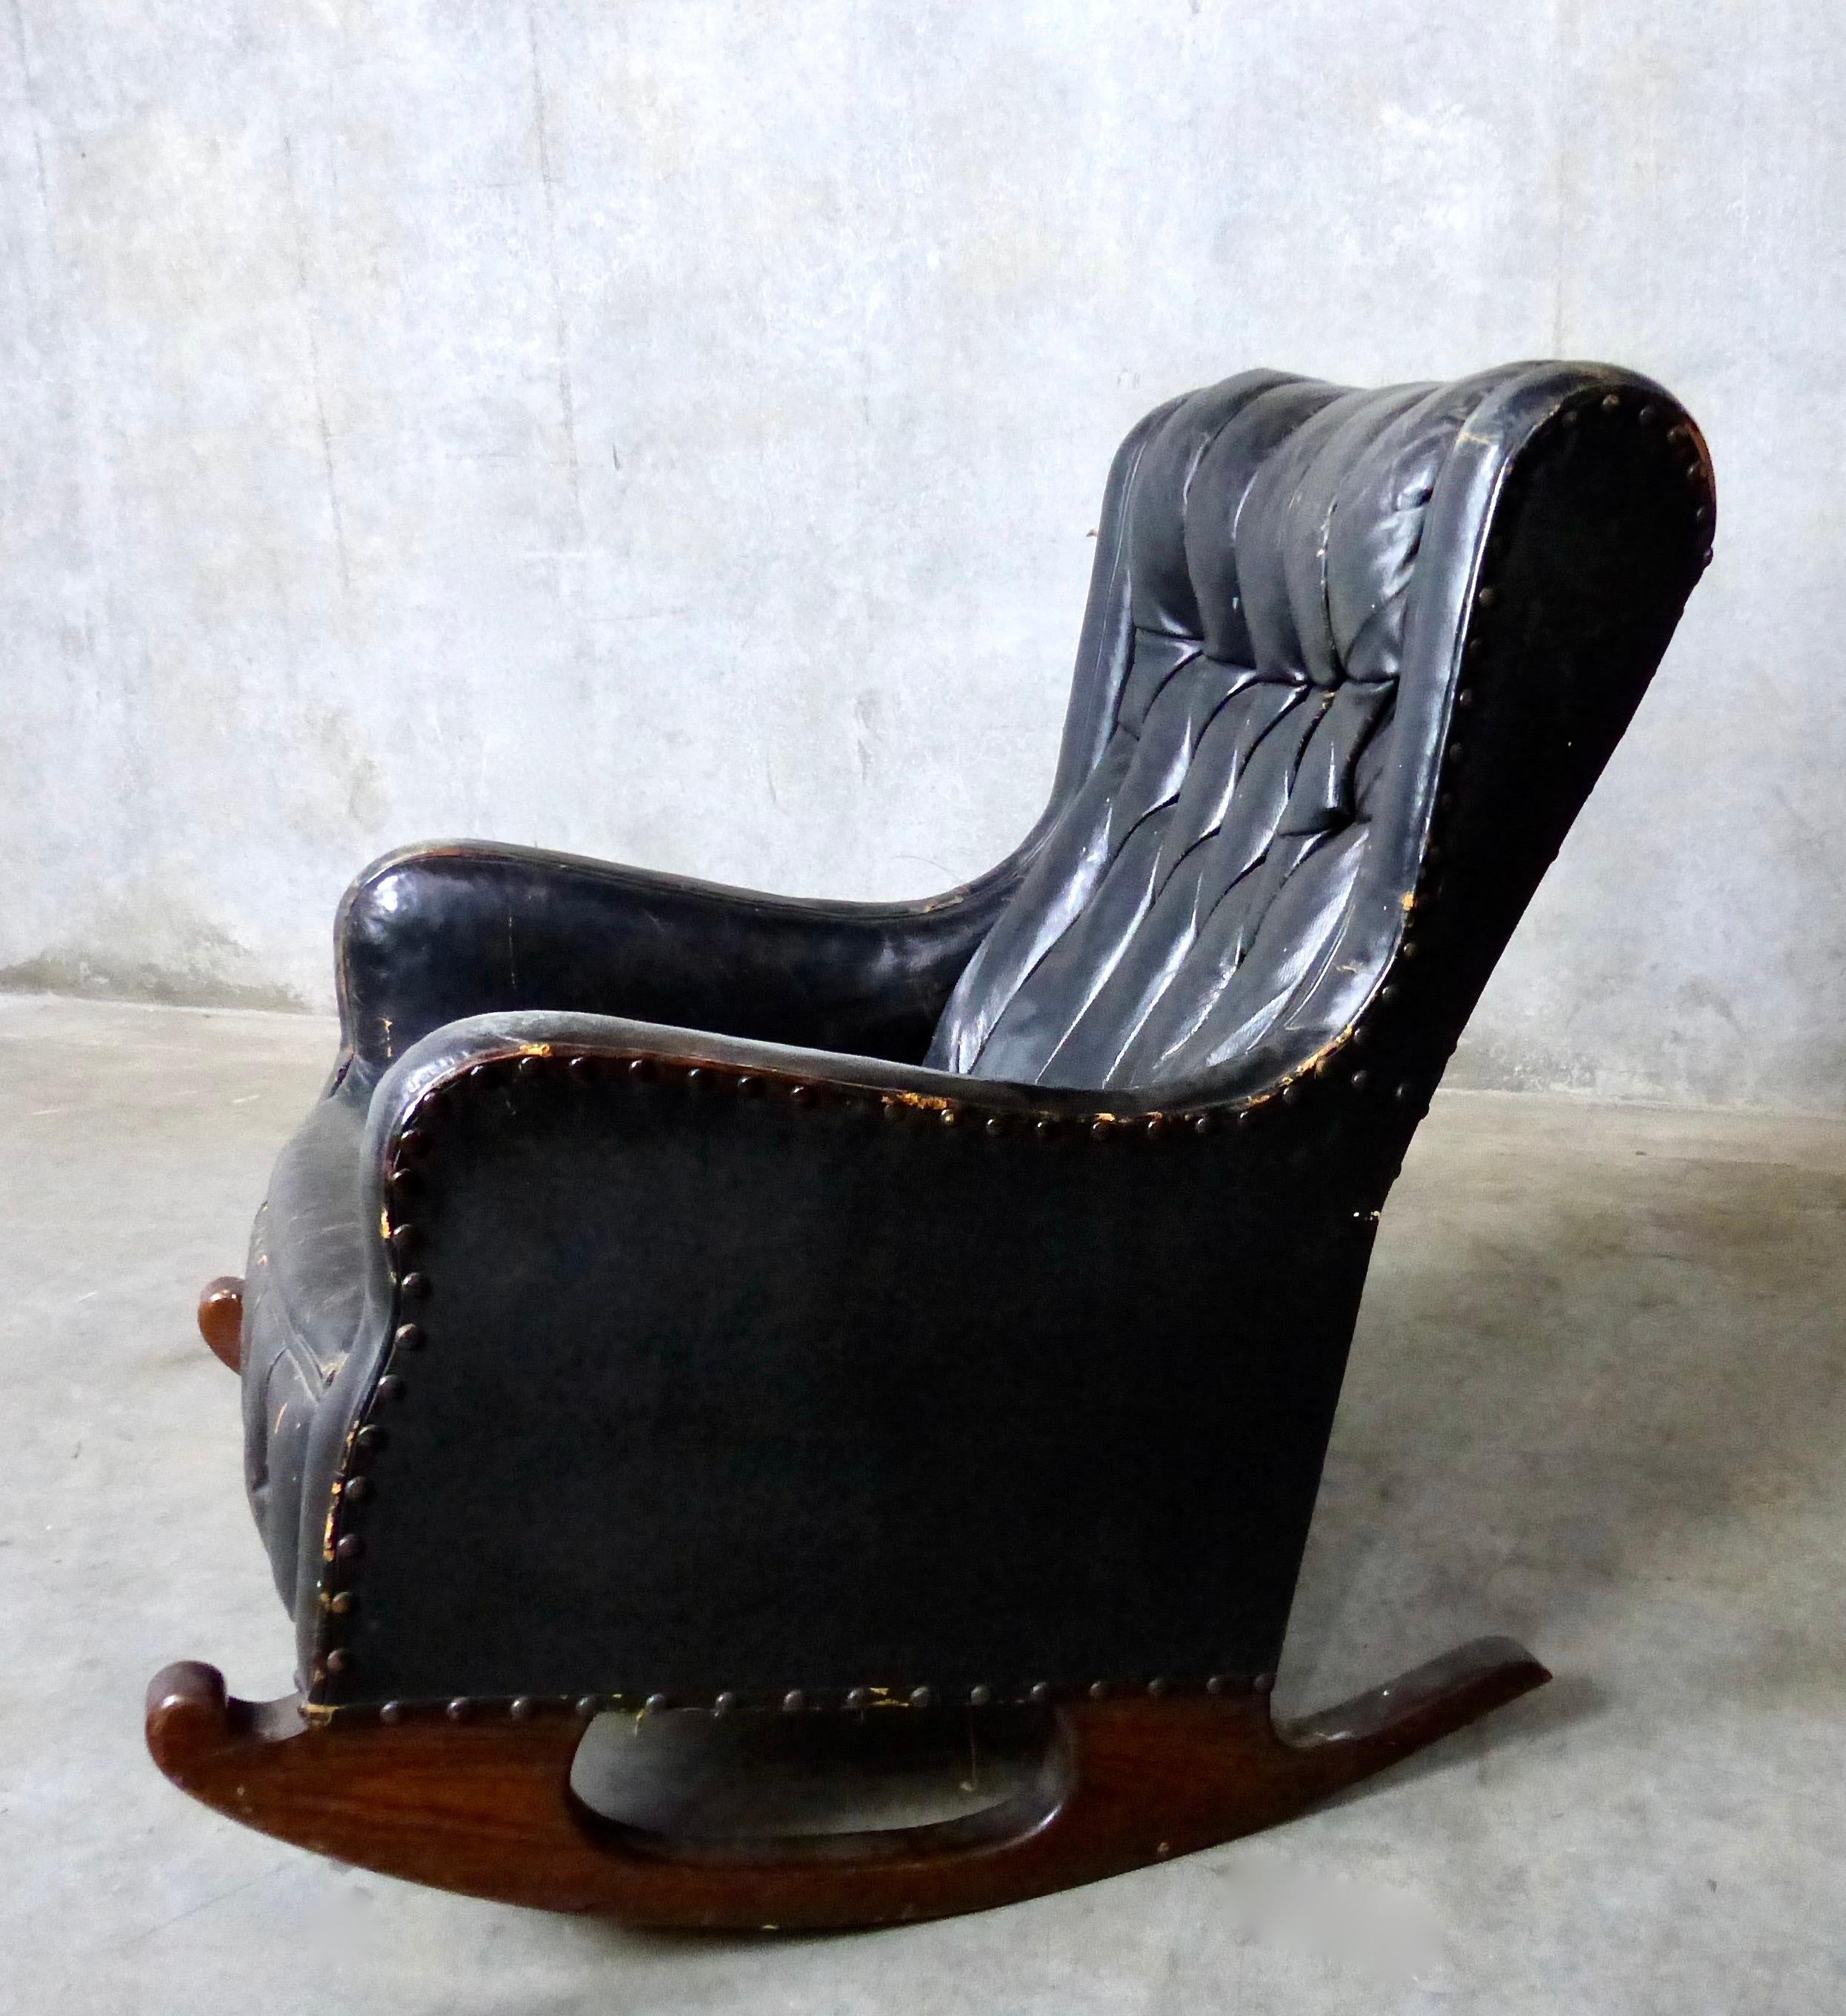 A circa 1900 leather black leather wingback style chair on solid wooden rockers. Tufted leather with horsehair interior. Style to spare in a compact rocking chair. Found in Eastern Canada.
Minor wear and tear but structurally sound.
Dimensions: